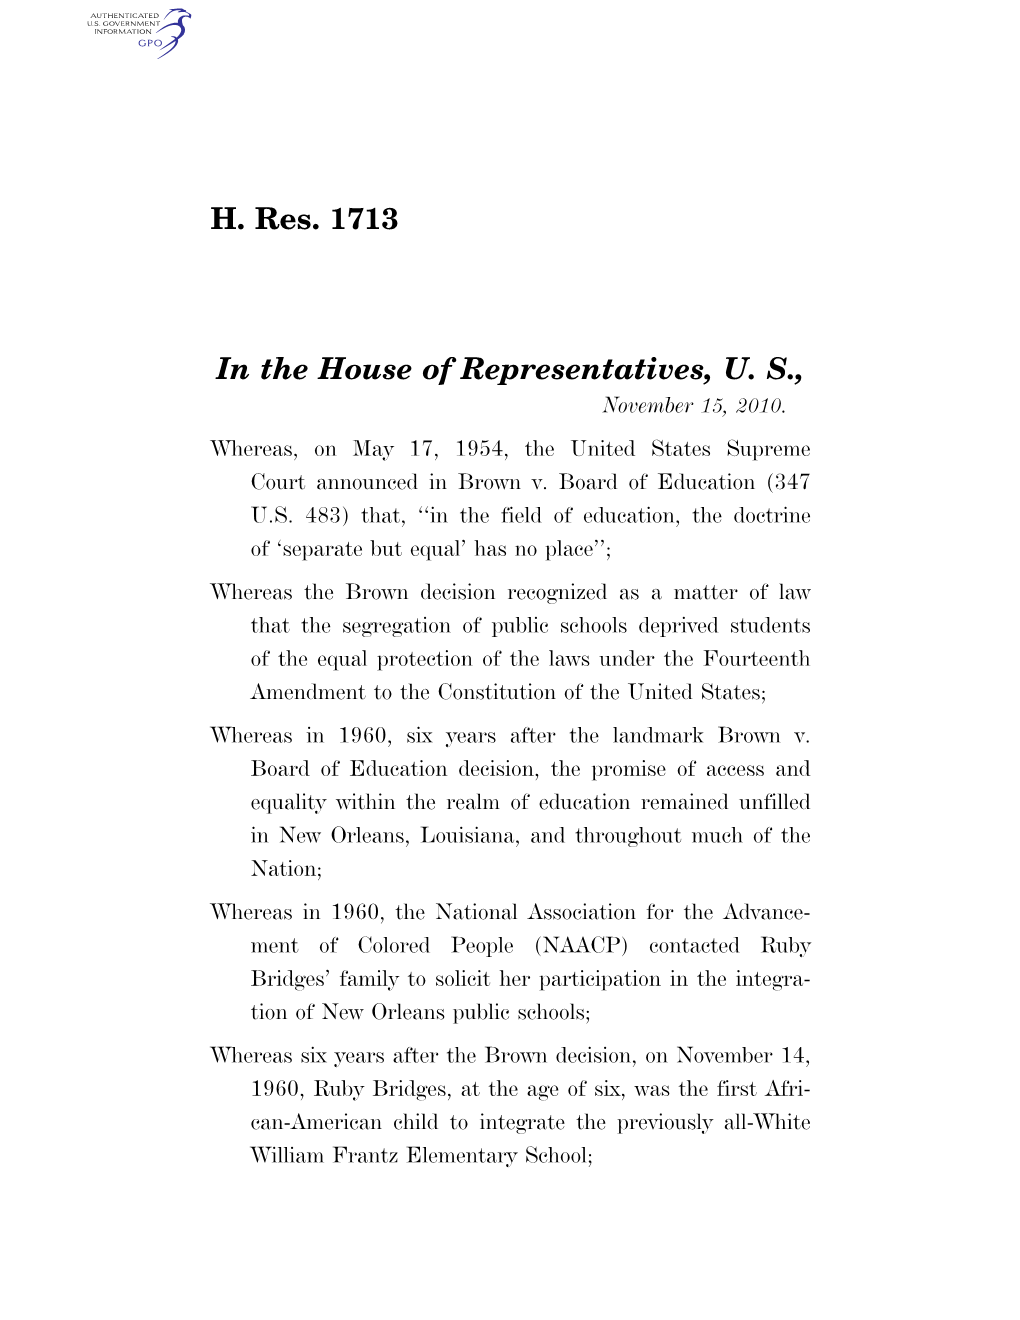 H. Res. 1713 in the House of Representatives, U